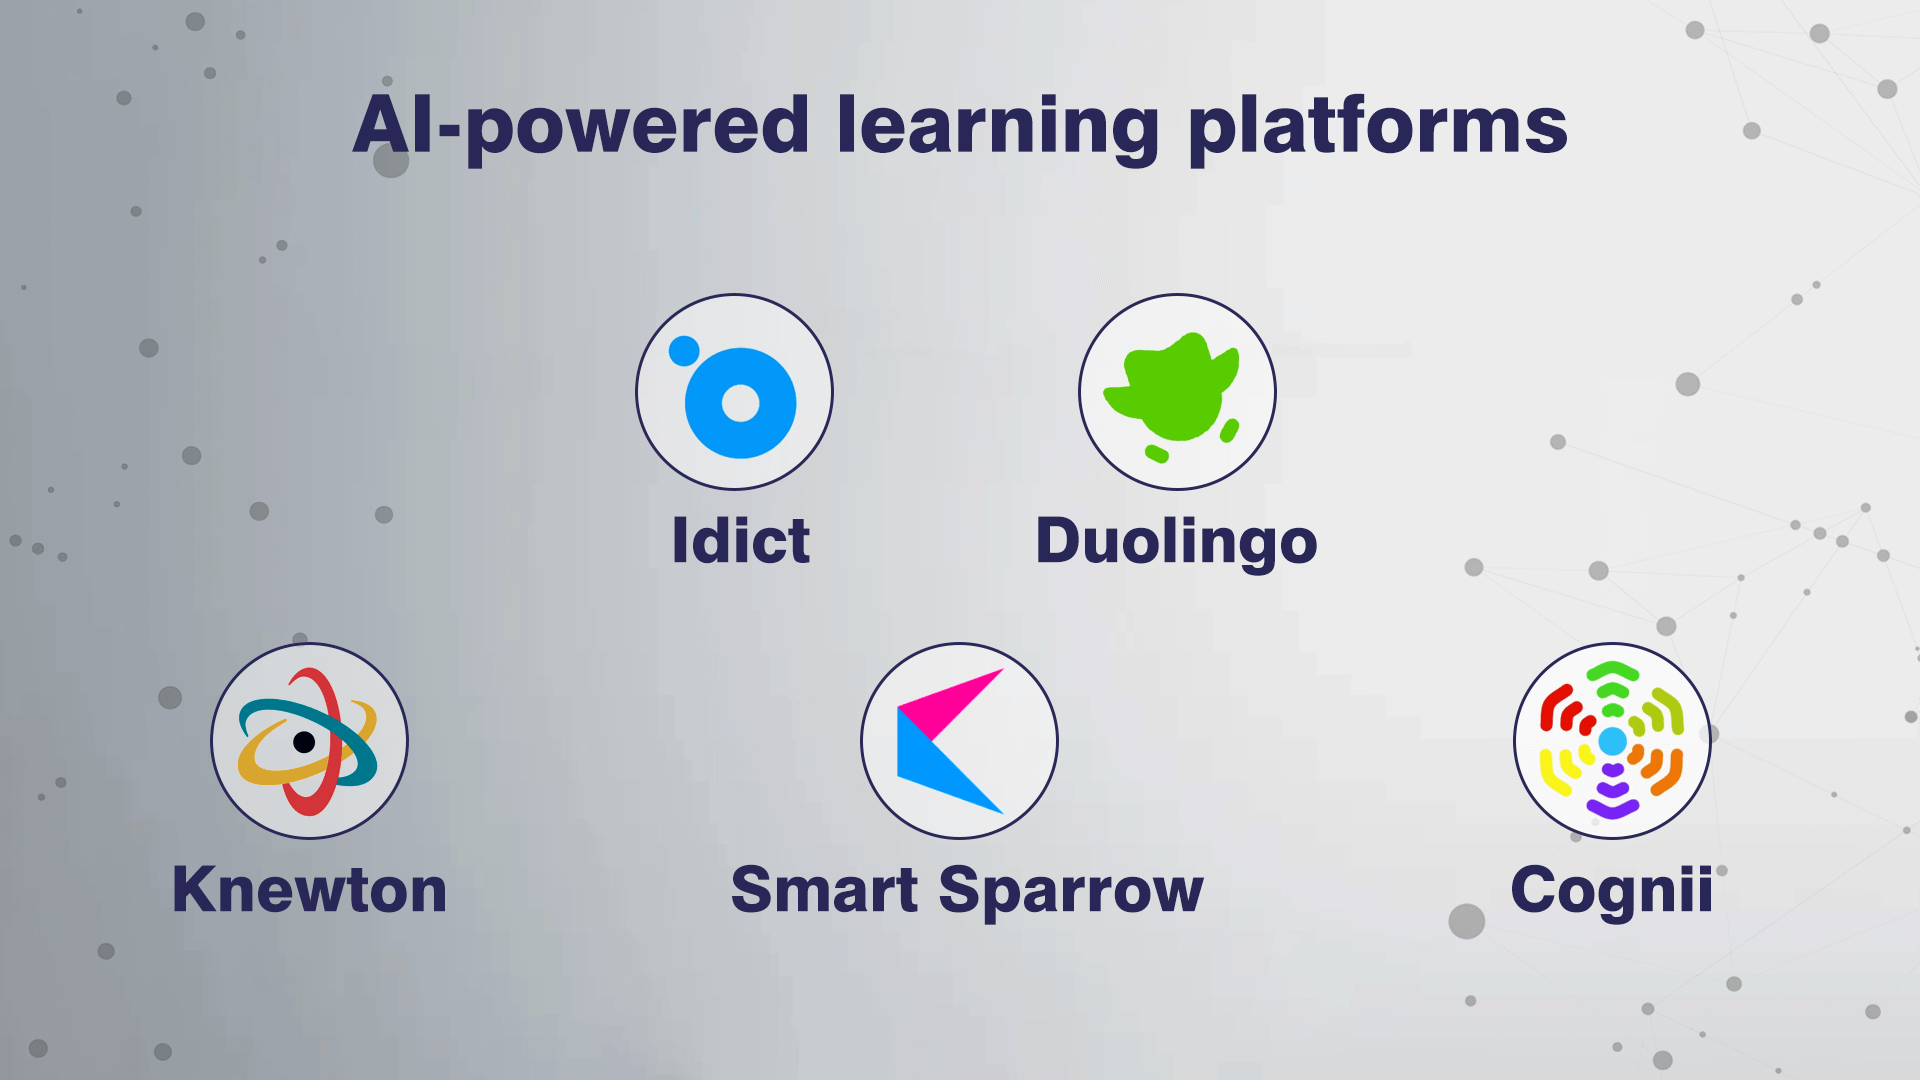 AI-powered learning platforms